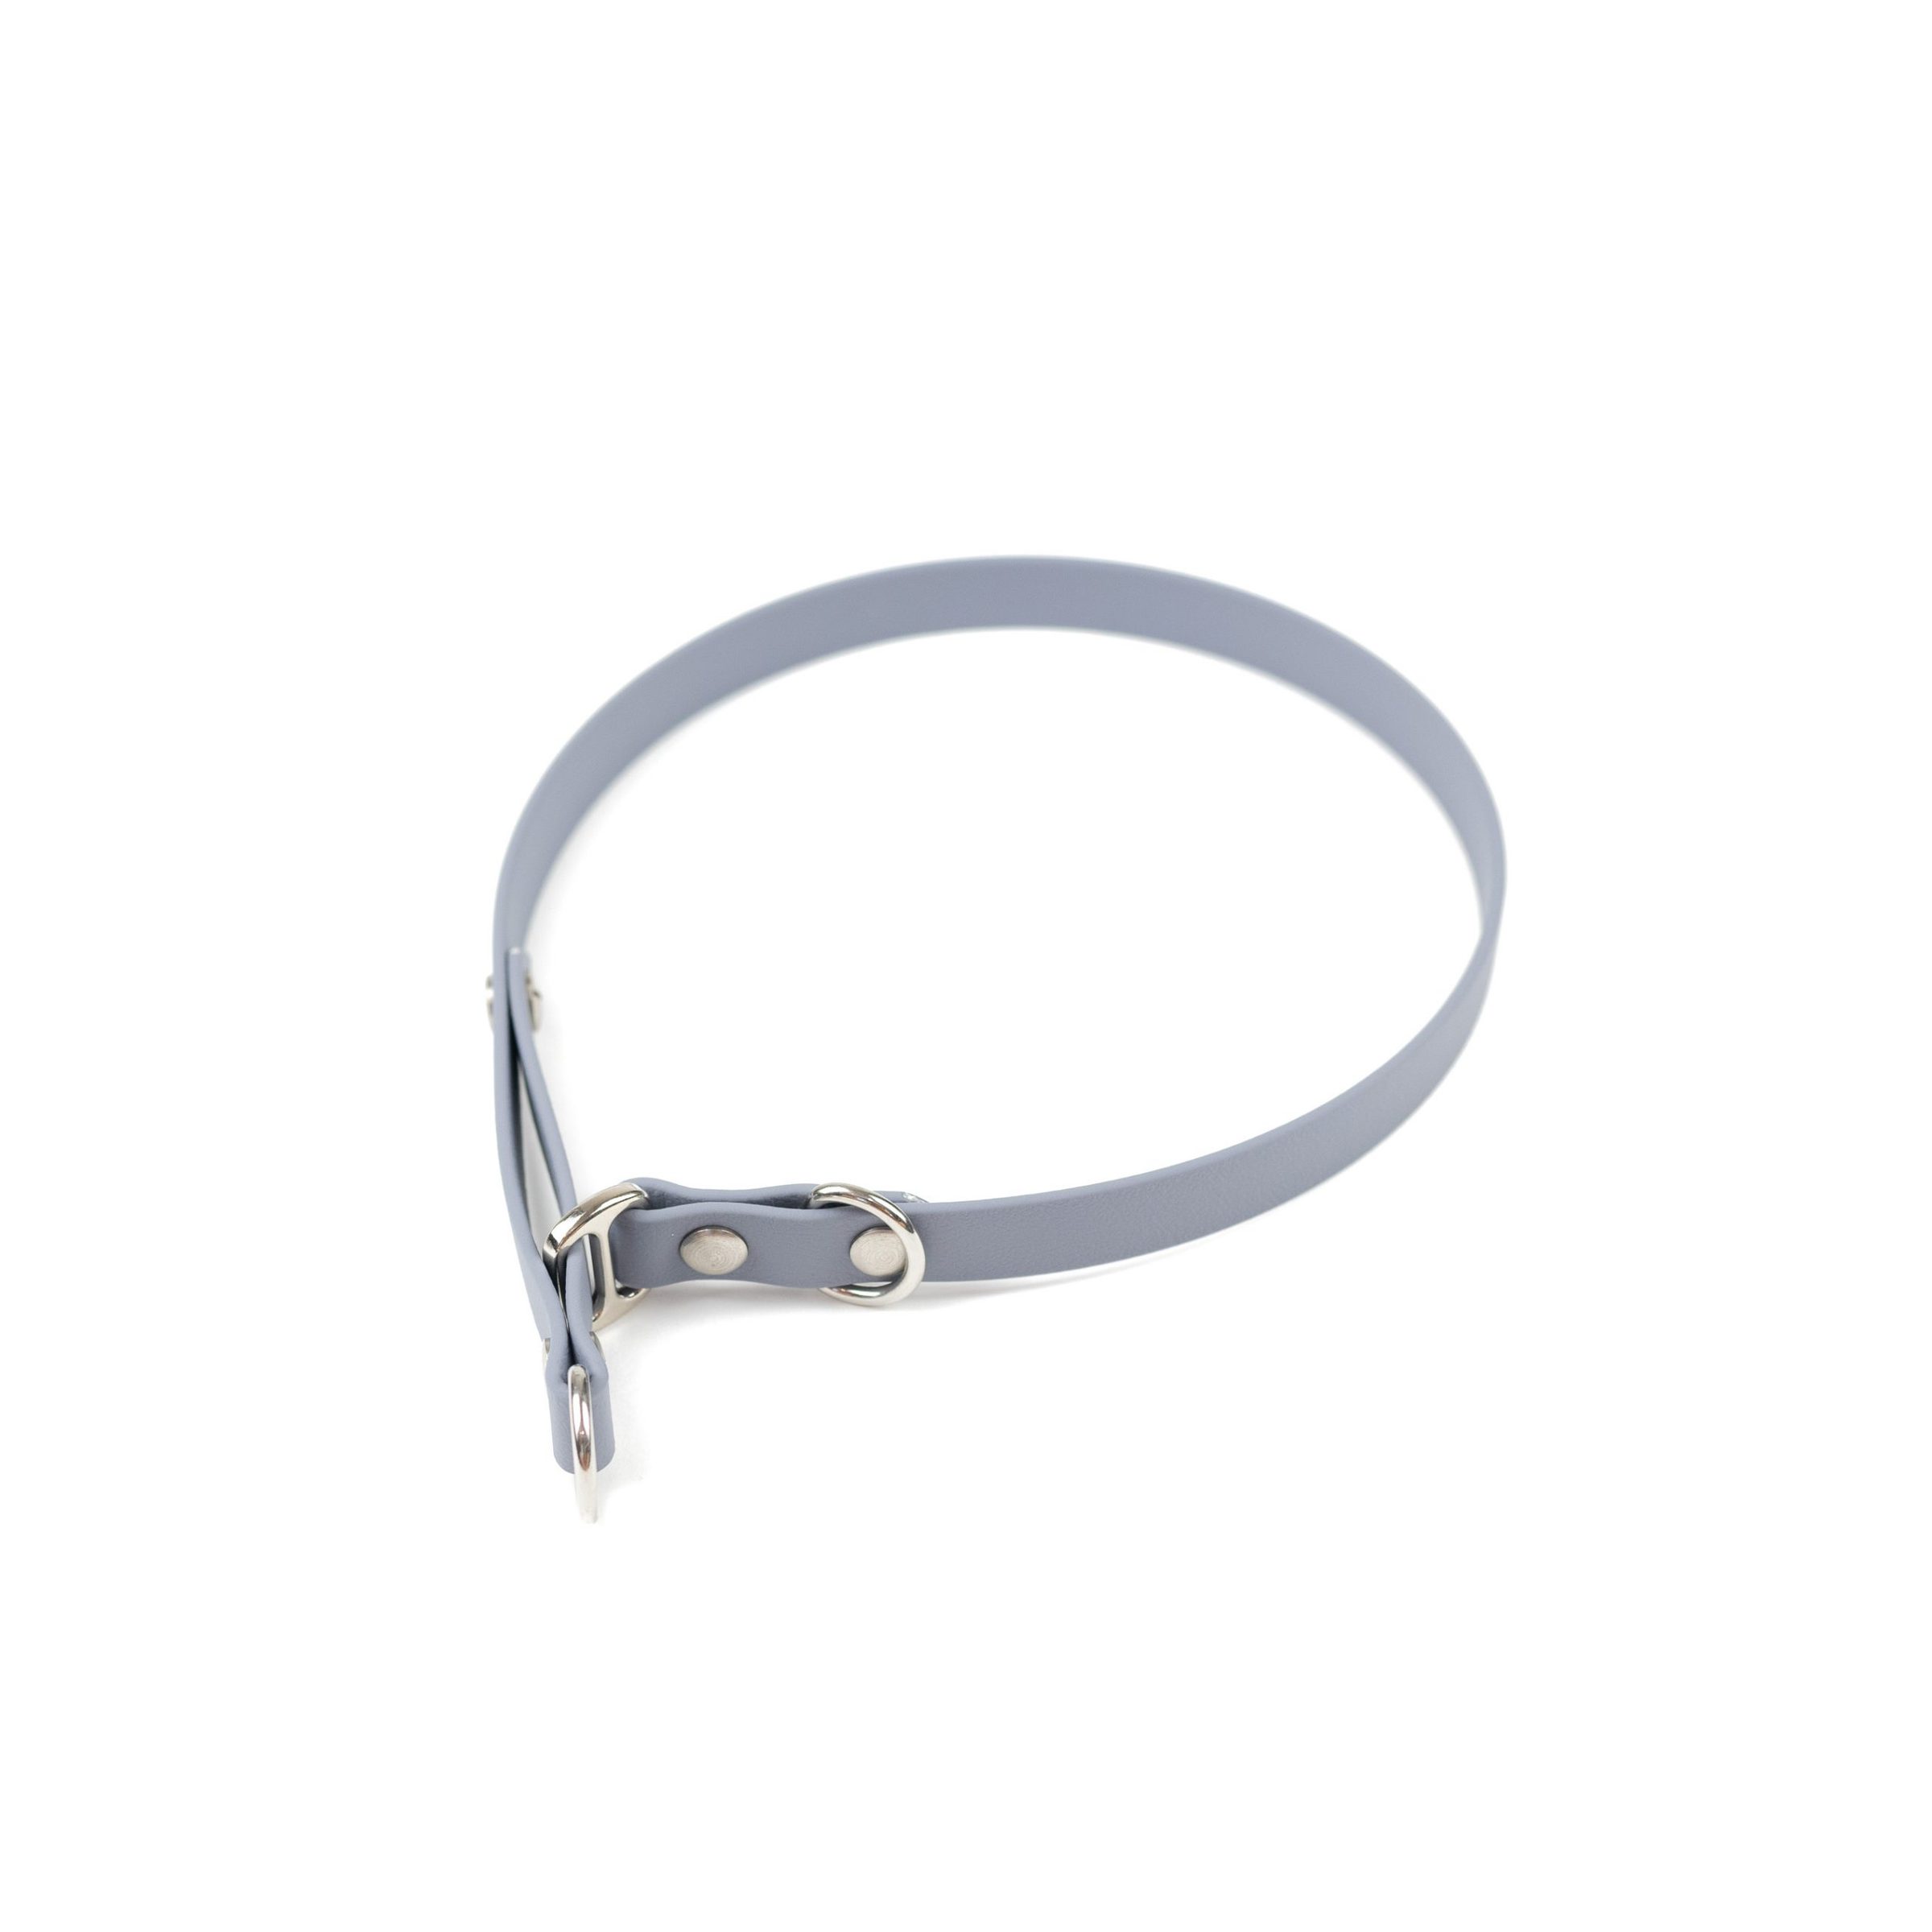 grey 5/8" classic limited slip collar in stainless steel